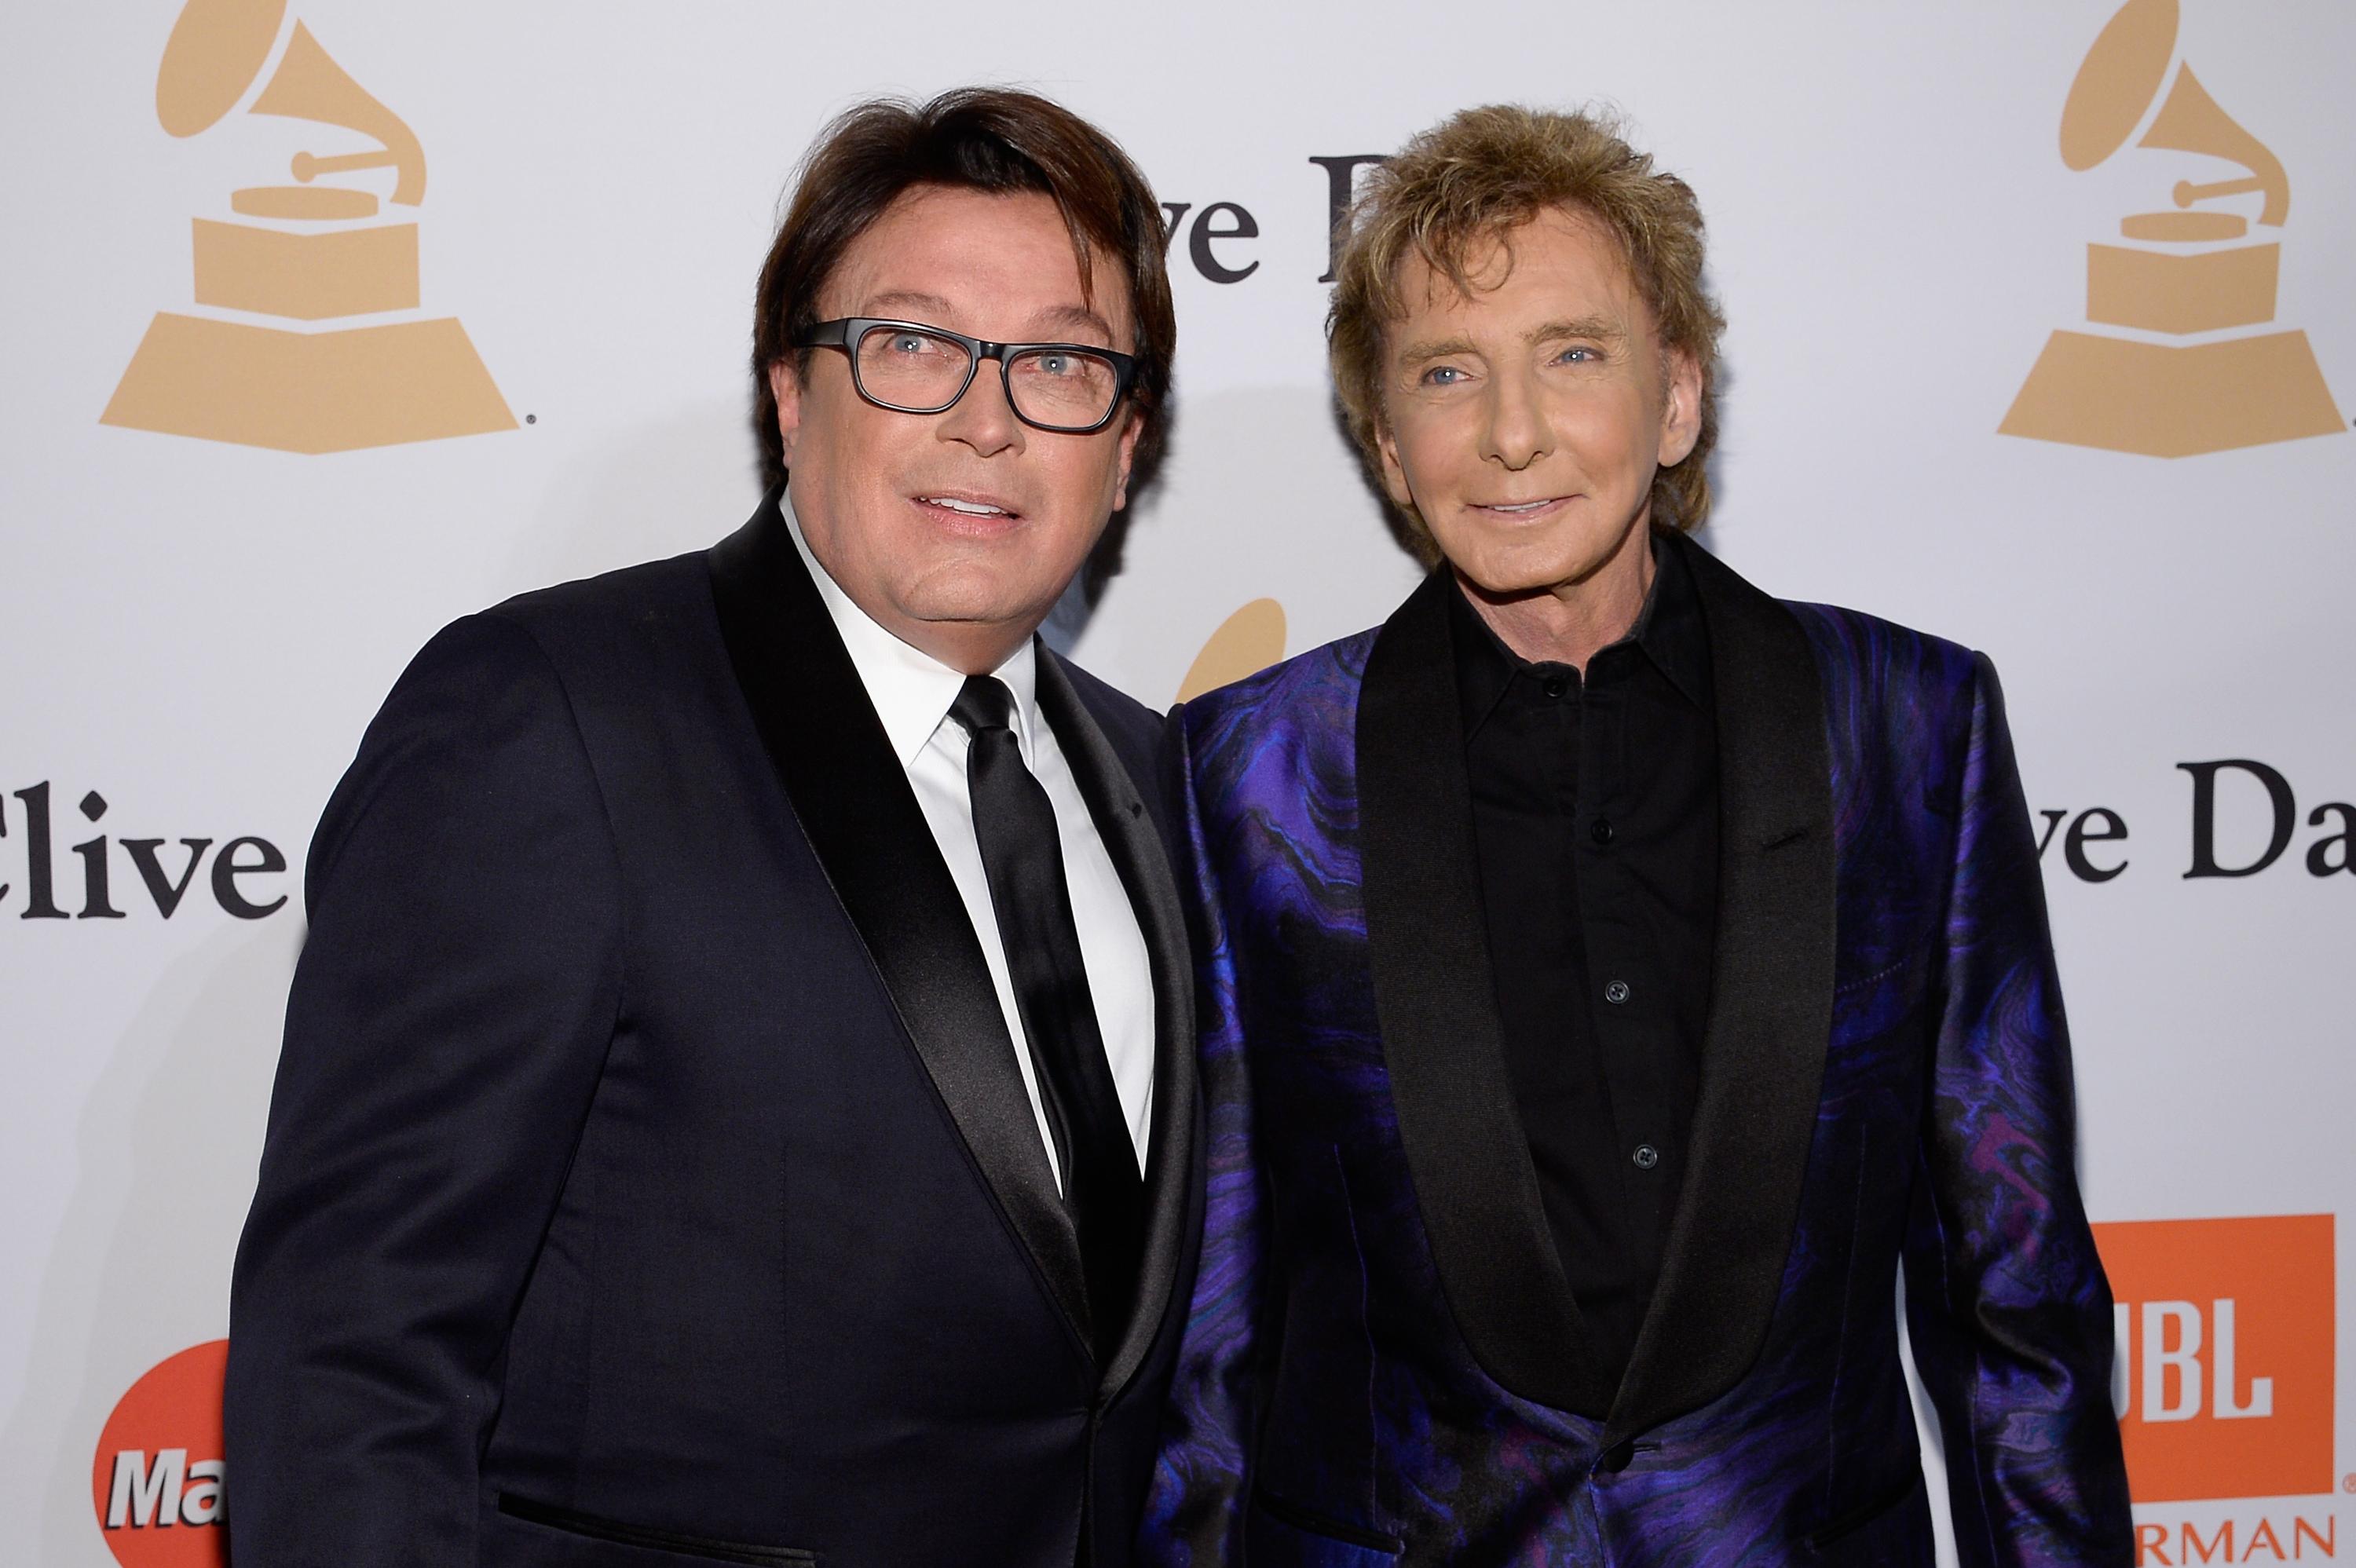 Barry Manilow opens up about his sexuality